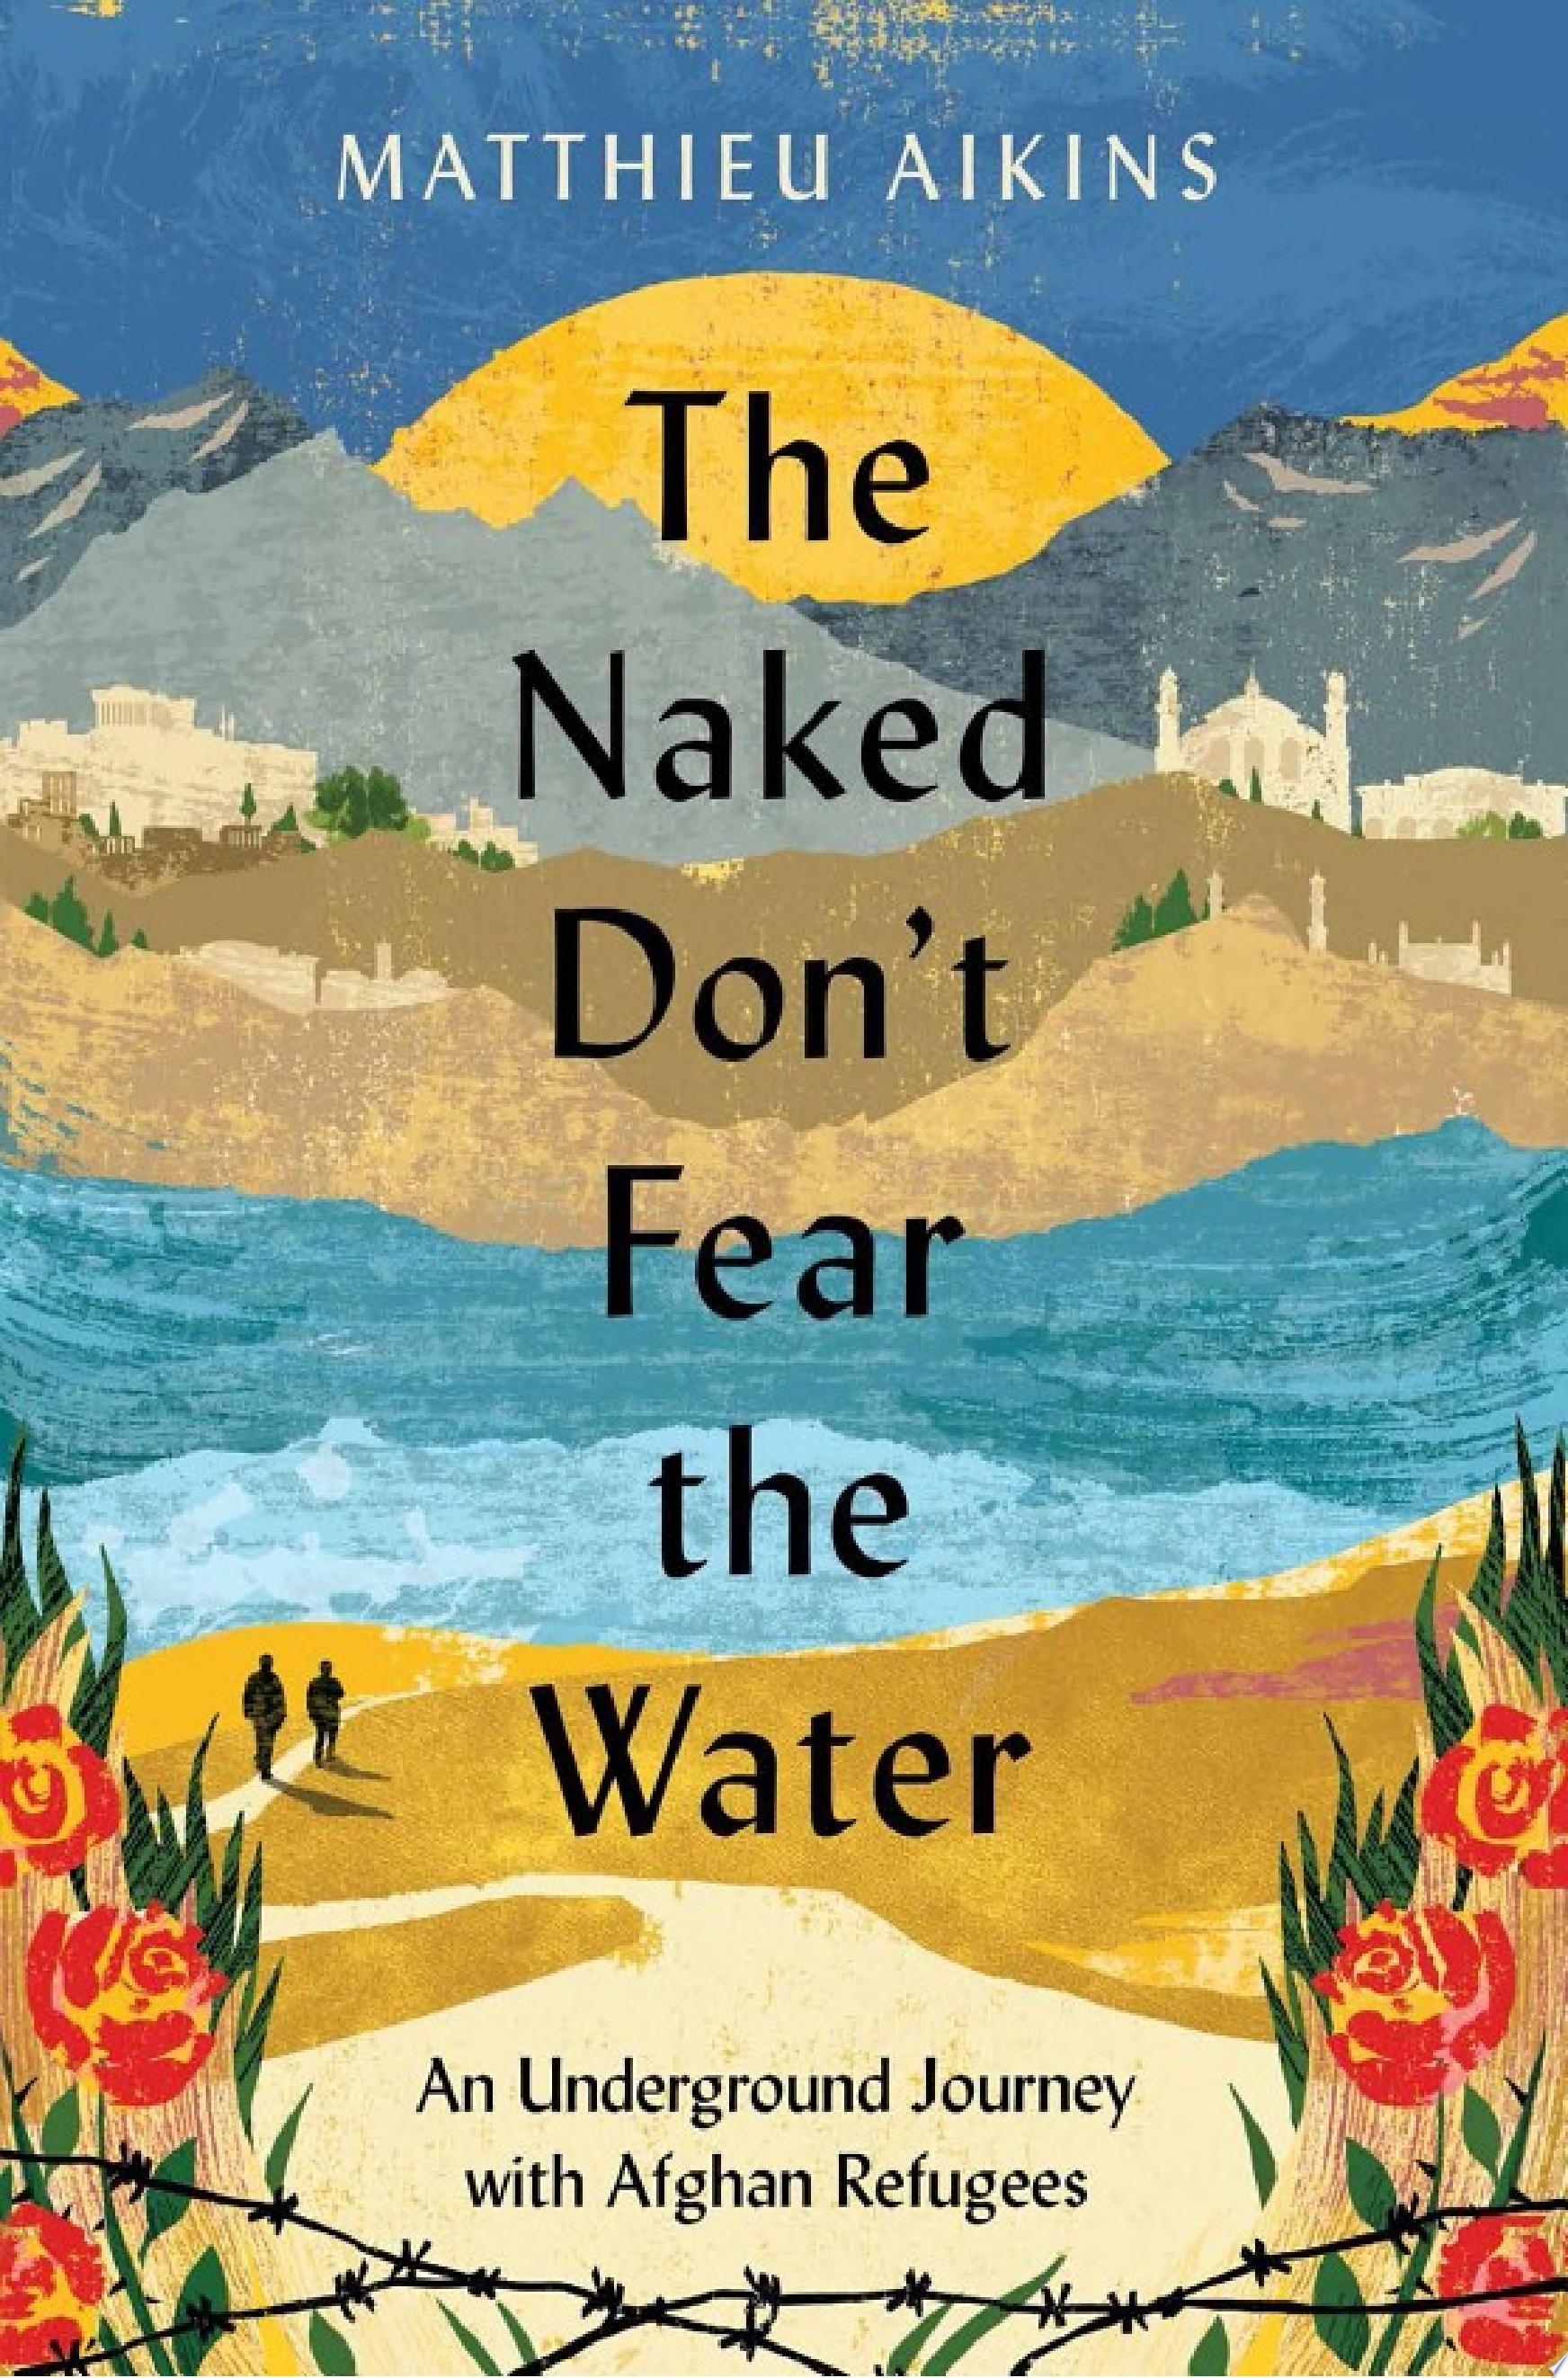 Image for "The Naked Don't Fear the Water"